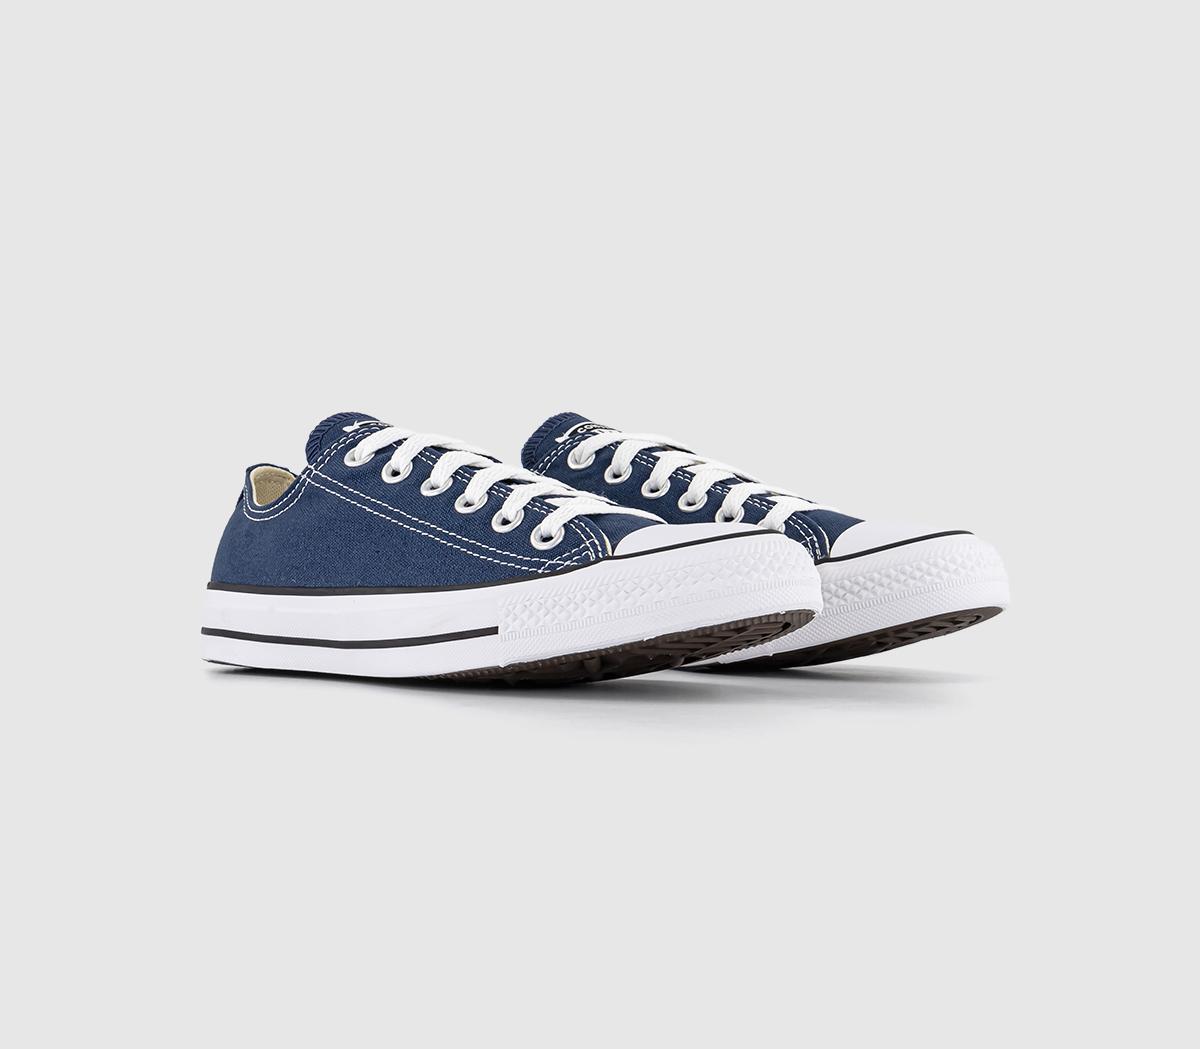 Mens Converse Kids All Star Low Canvas Trainers In Navy Blue And White, 5.5